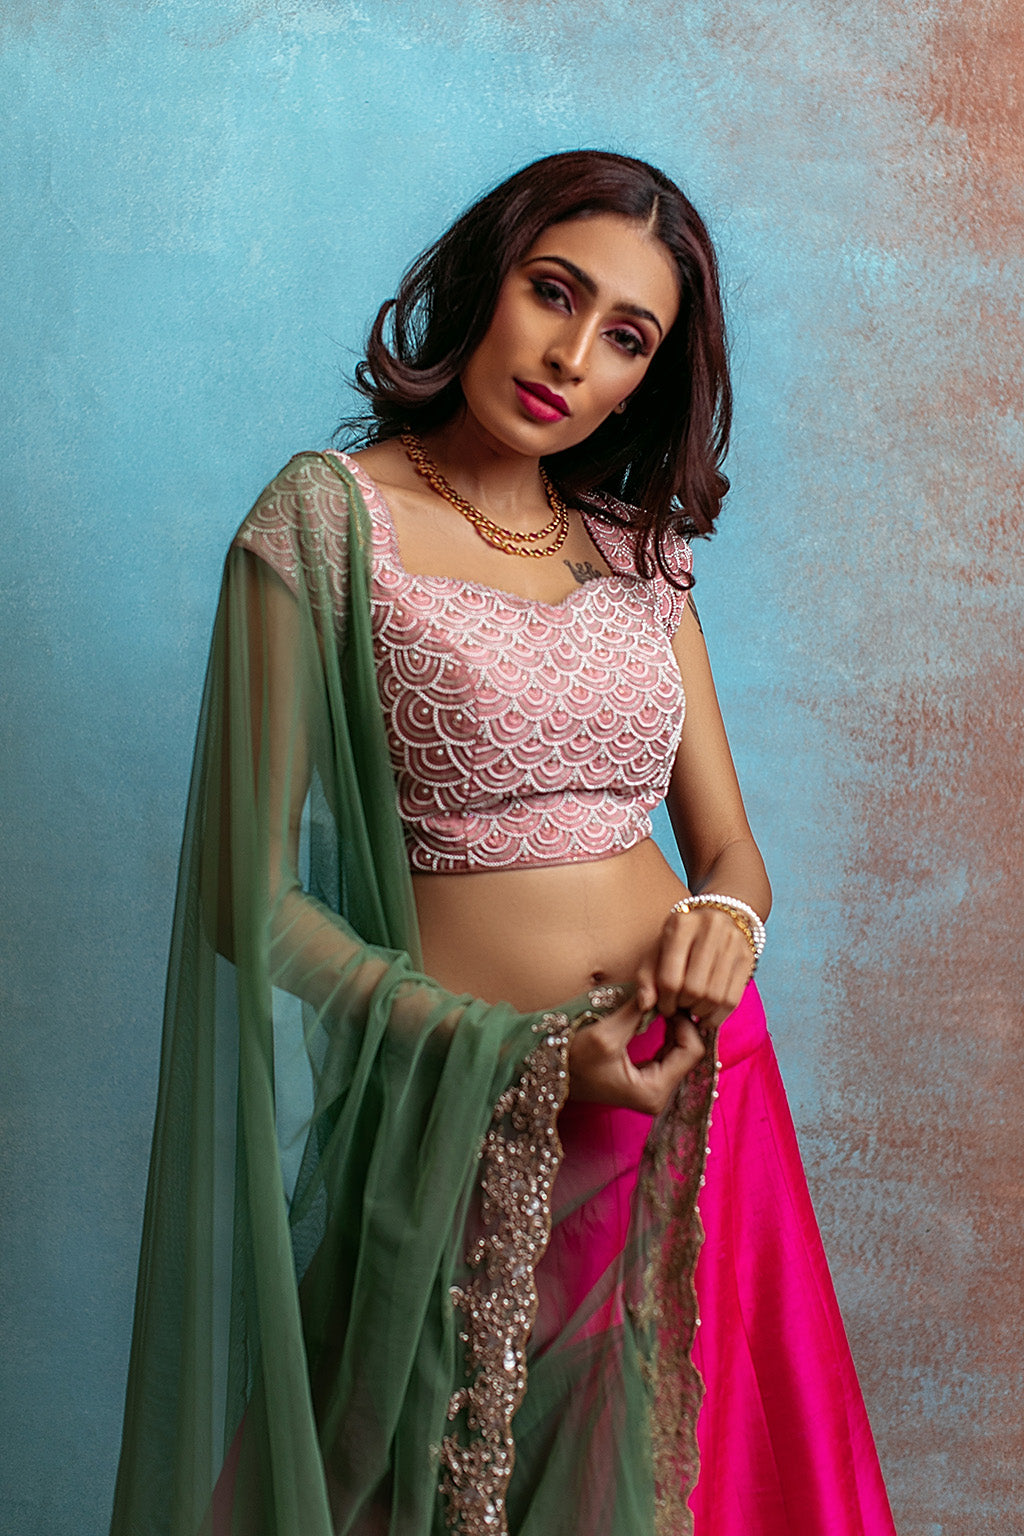 Scallop pearl embellished  blouse,panelled lehenga with floral work and tulle dupatta